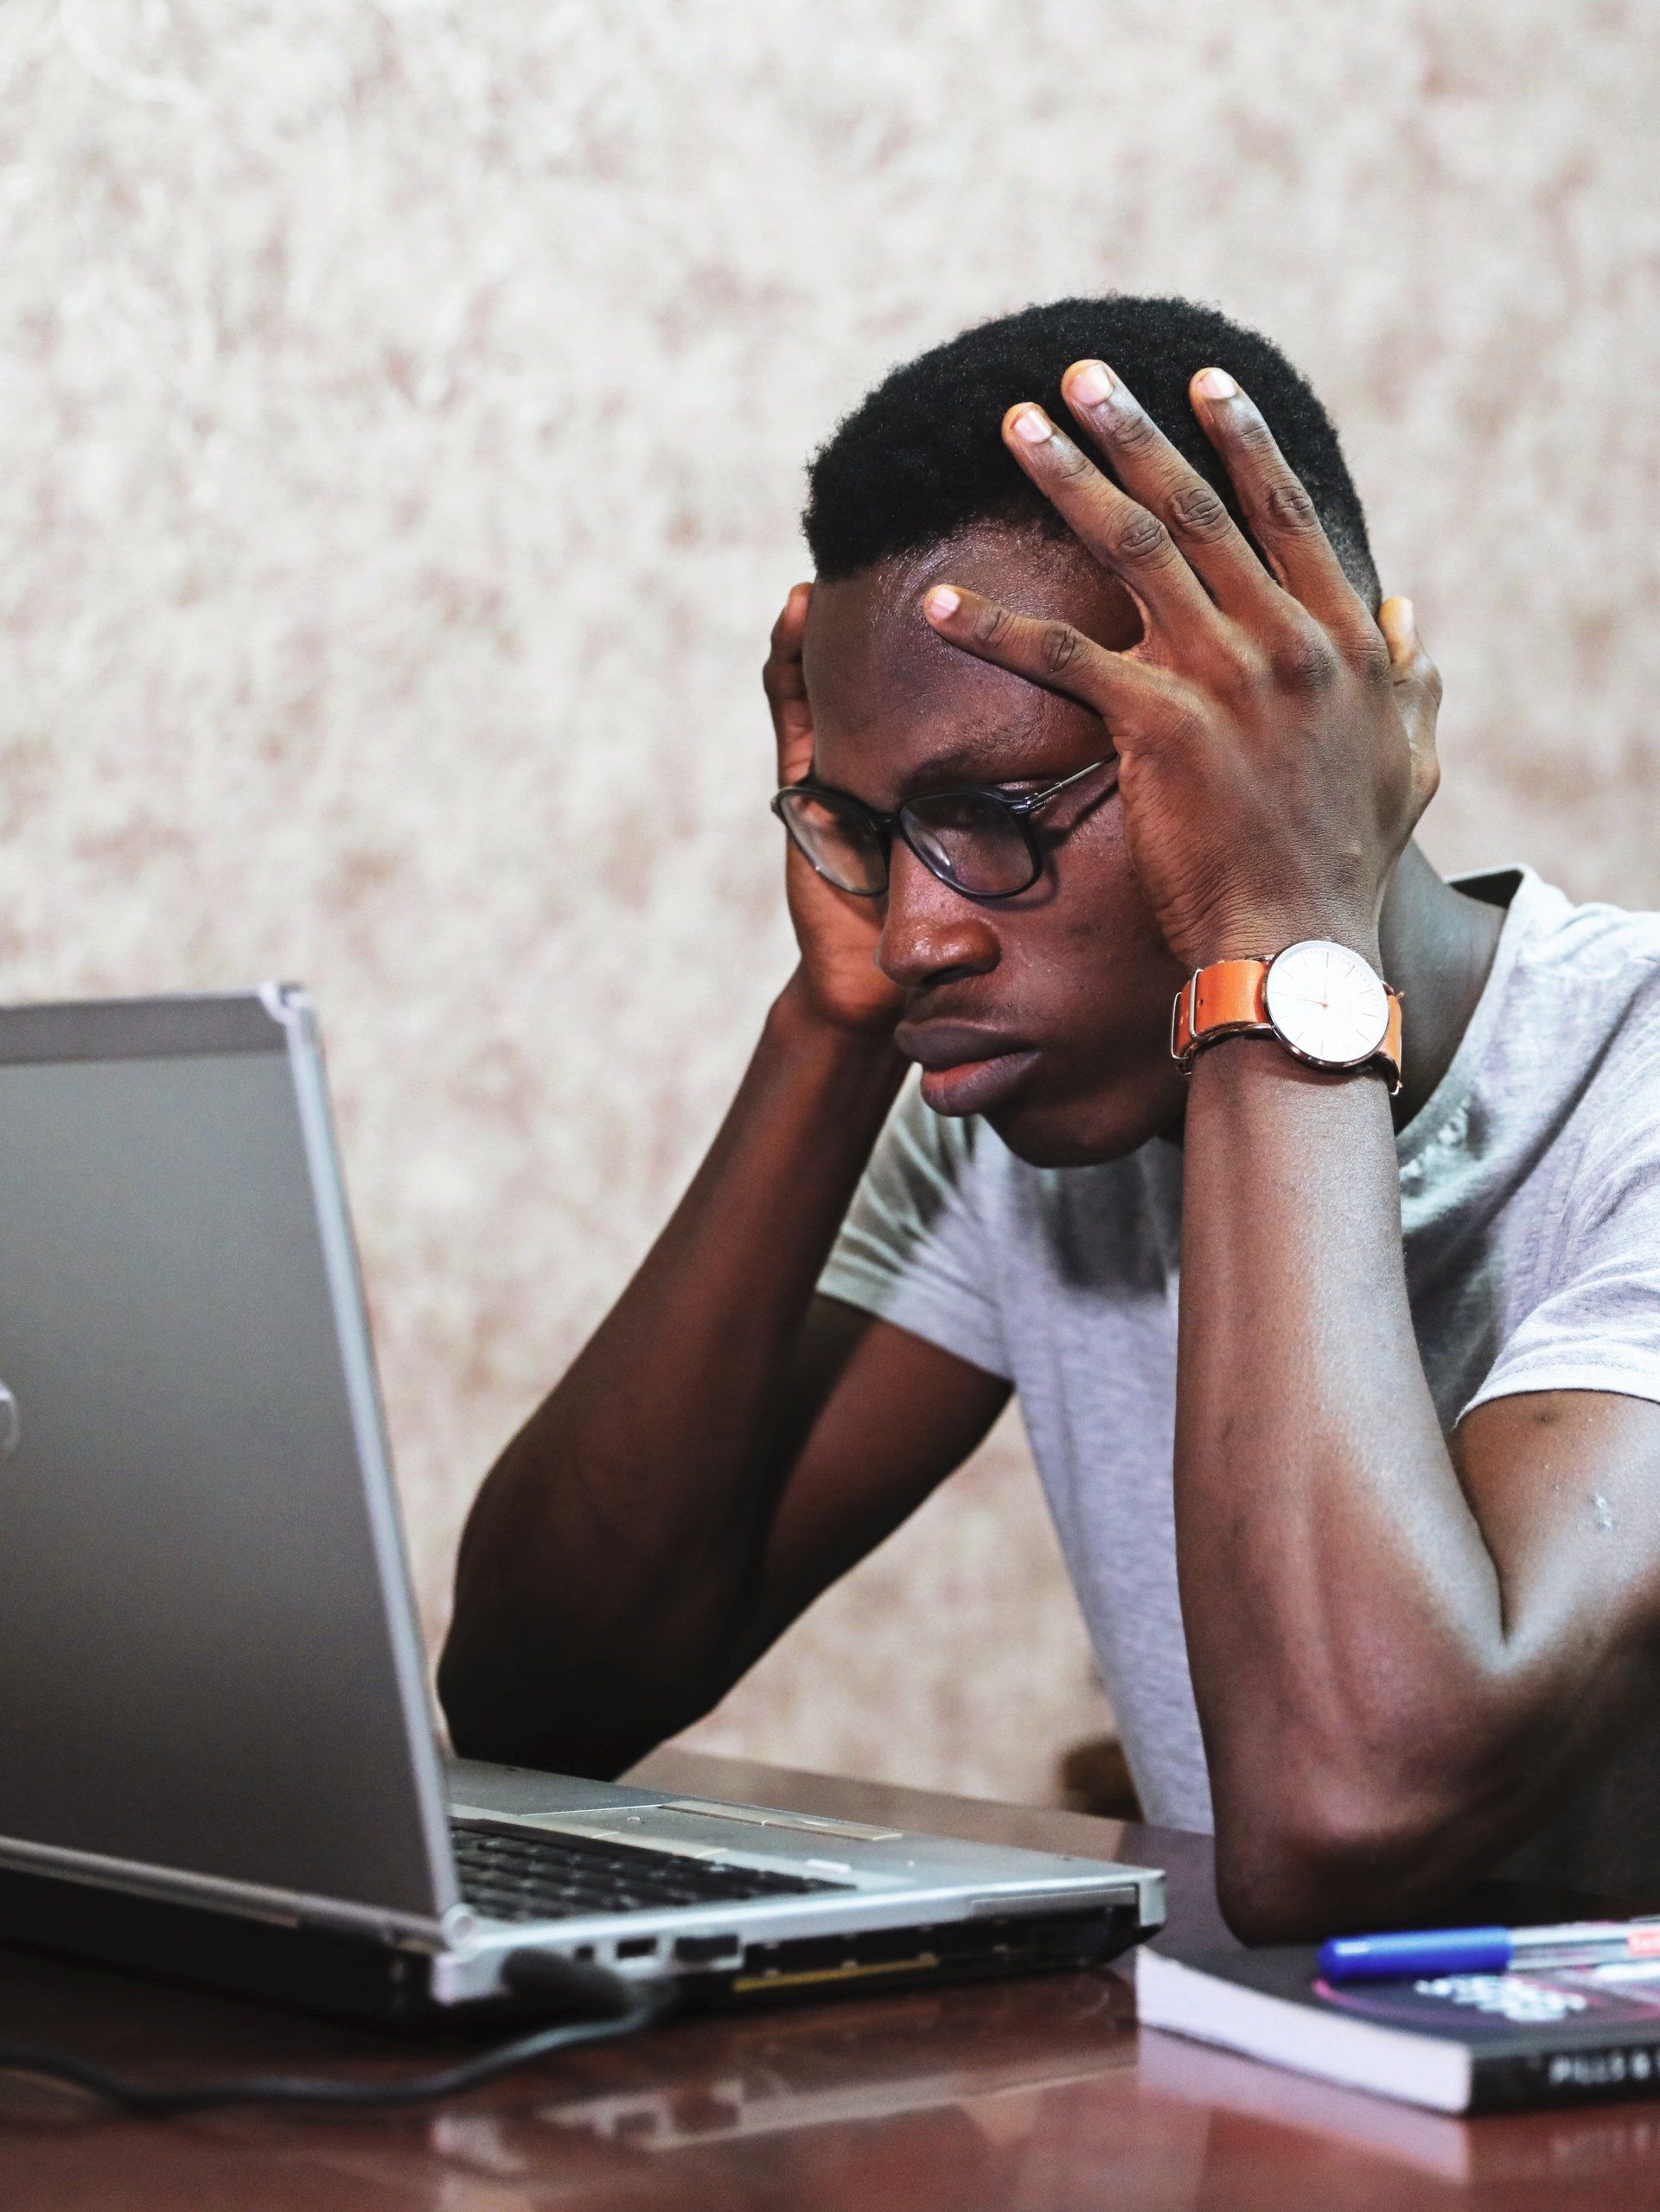 A man is sitting at a desk with his hands on his head looking at a laptop.